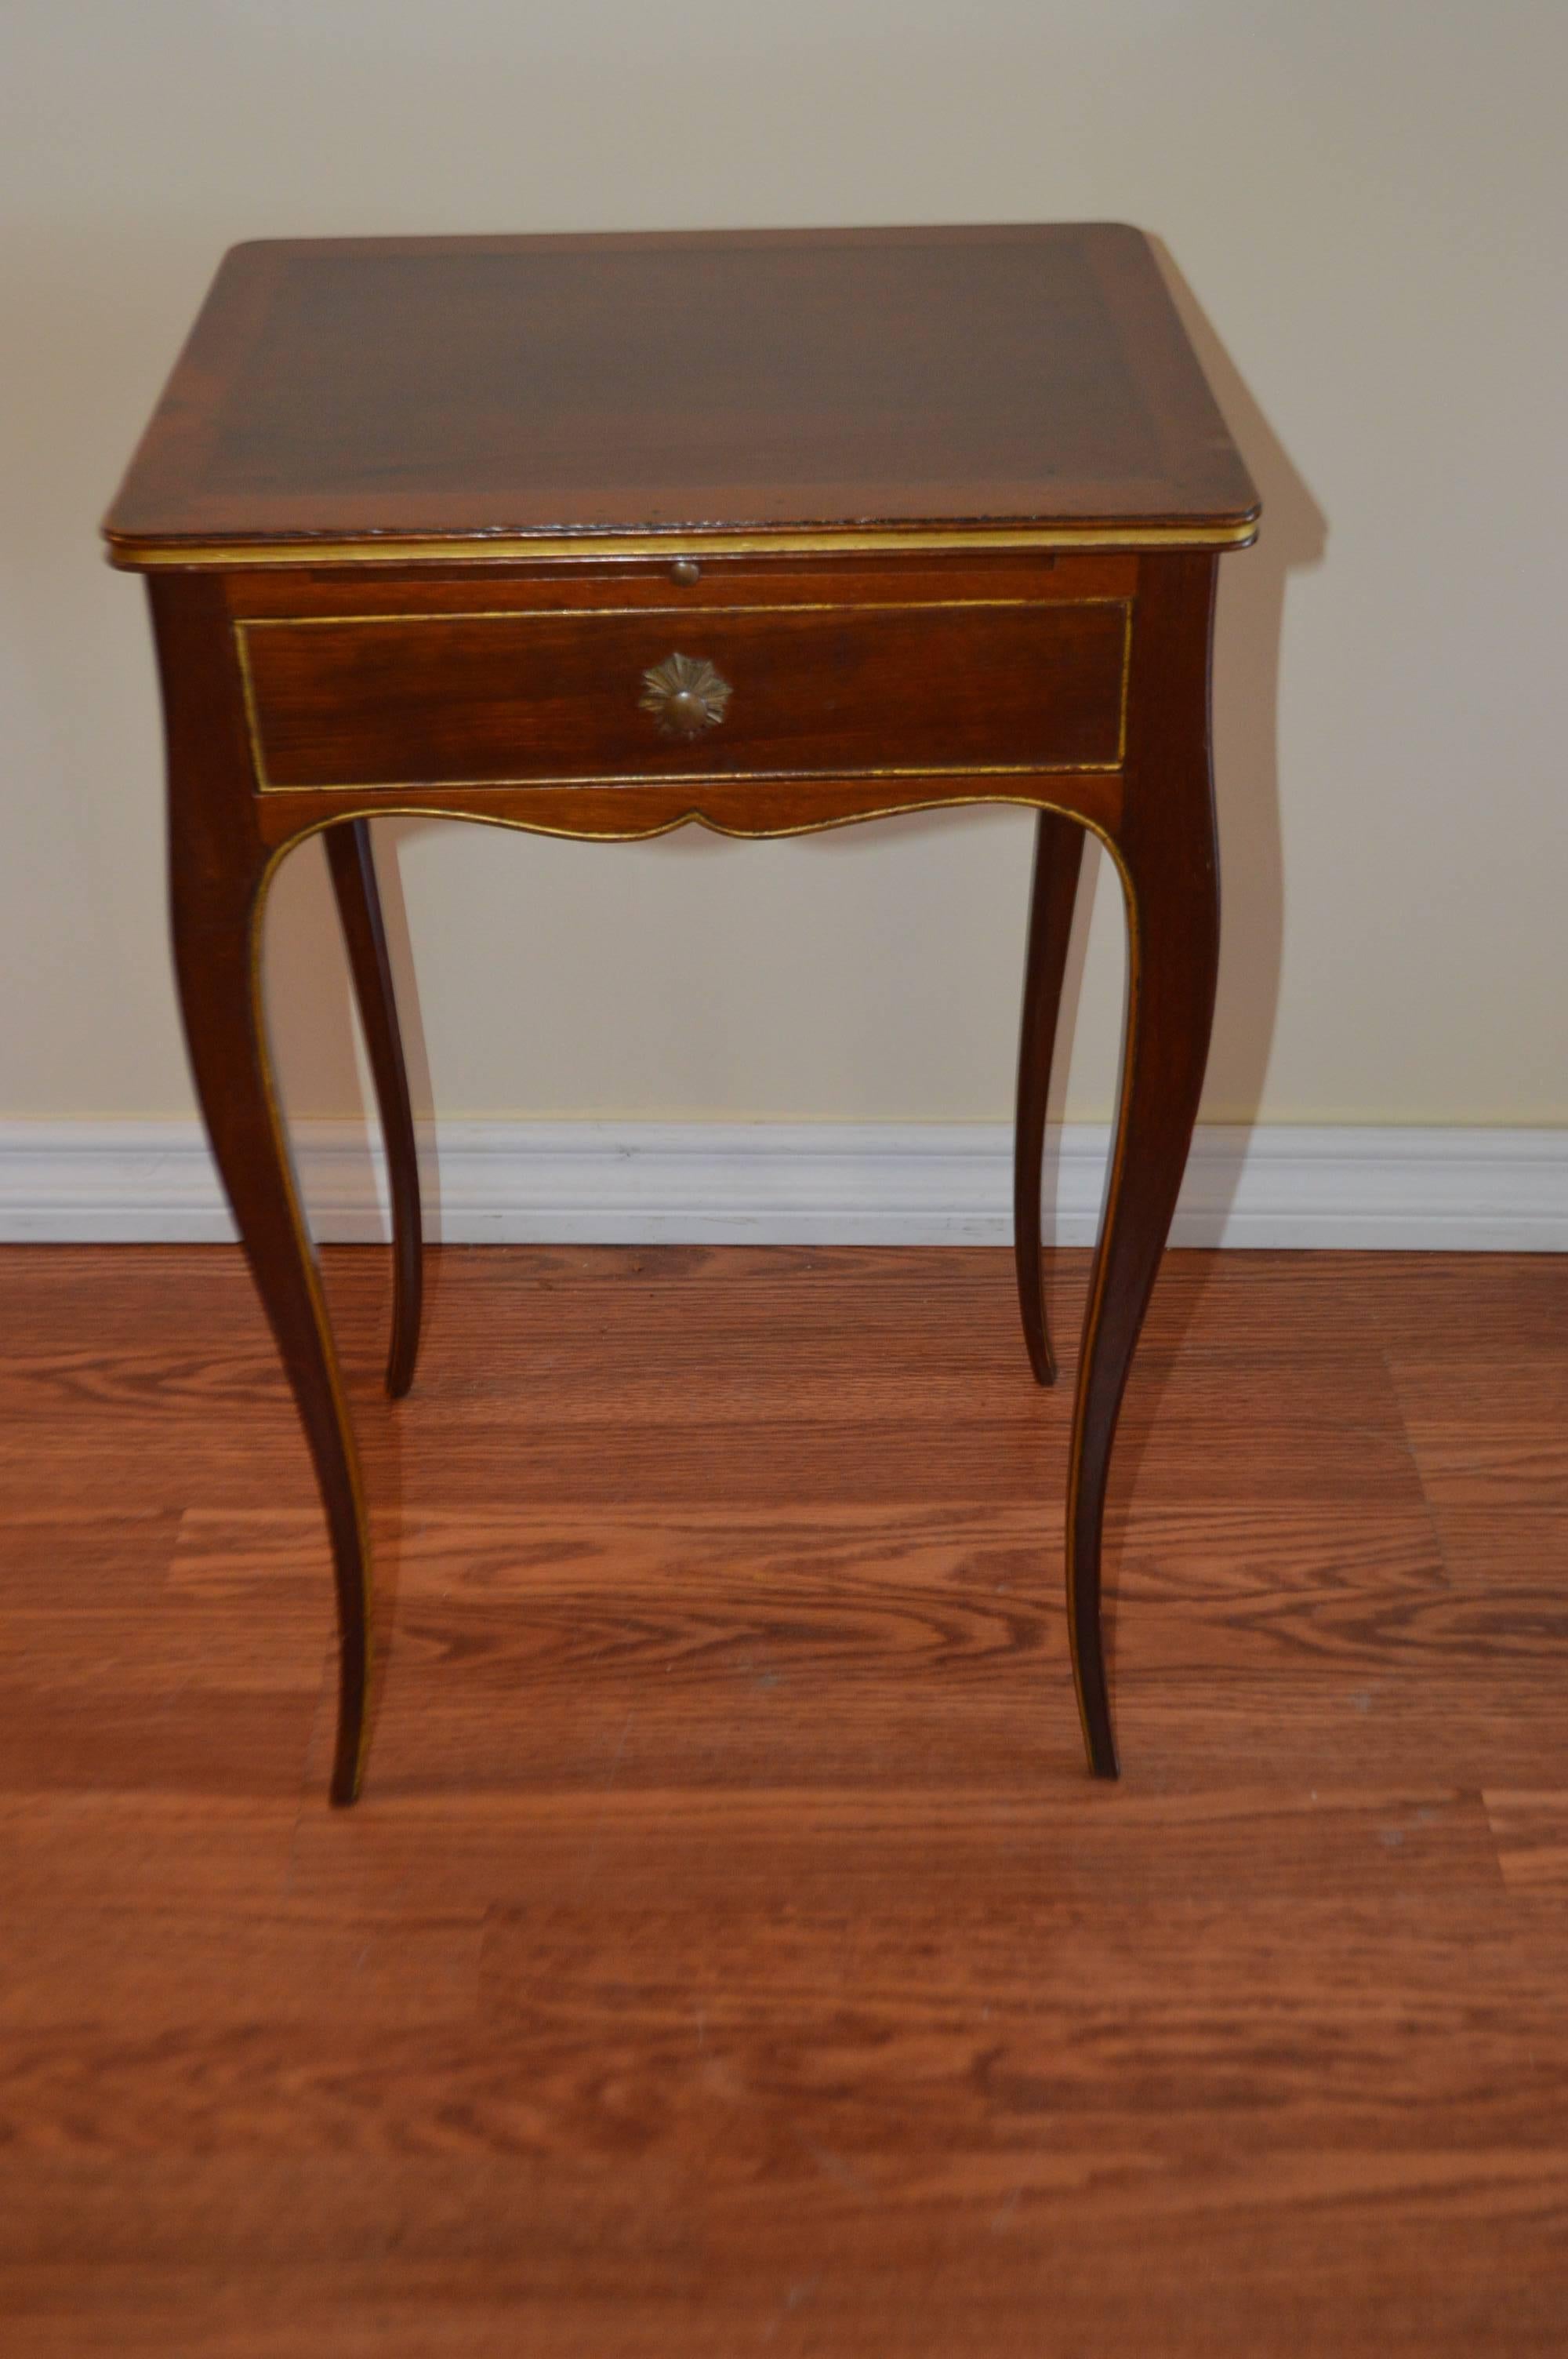 Most elegant and slender fine quality pair of mahogany side tables, having a fine gilded trace molding around all edges of the table. There is a small drawer and a pull-out leather top table above the drawer to hold a glass on each table.